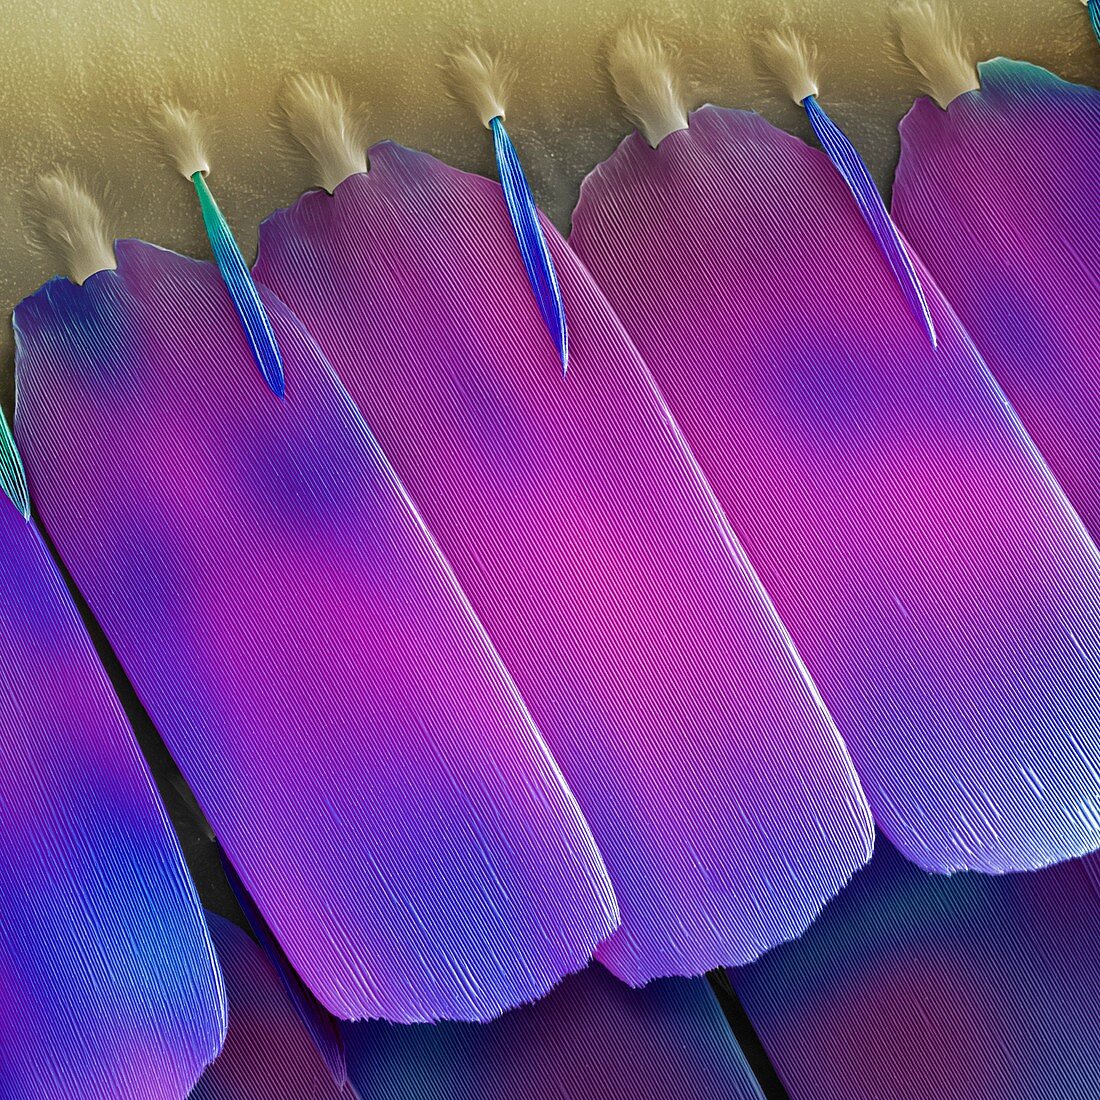 Butterfly wing scales,SEM